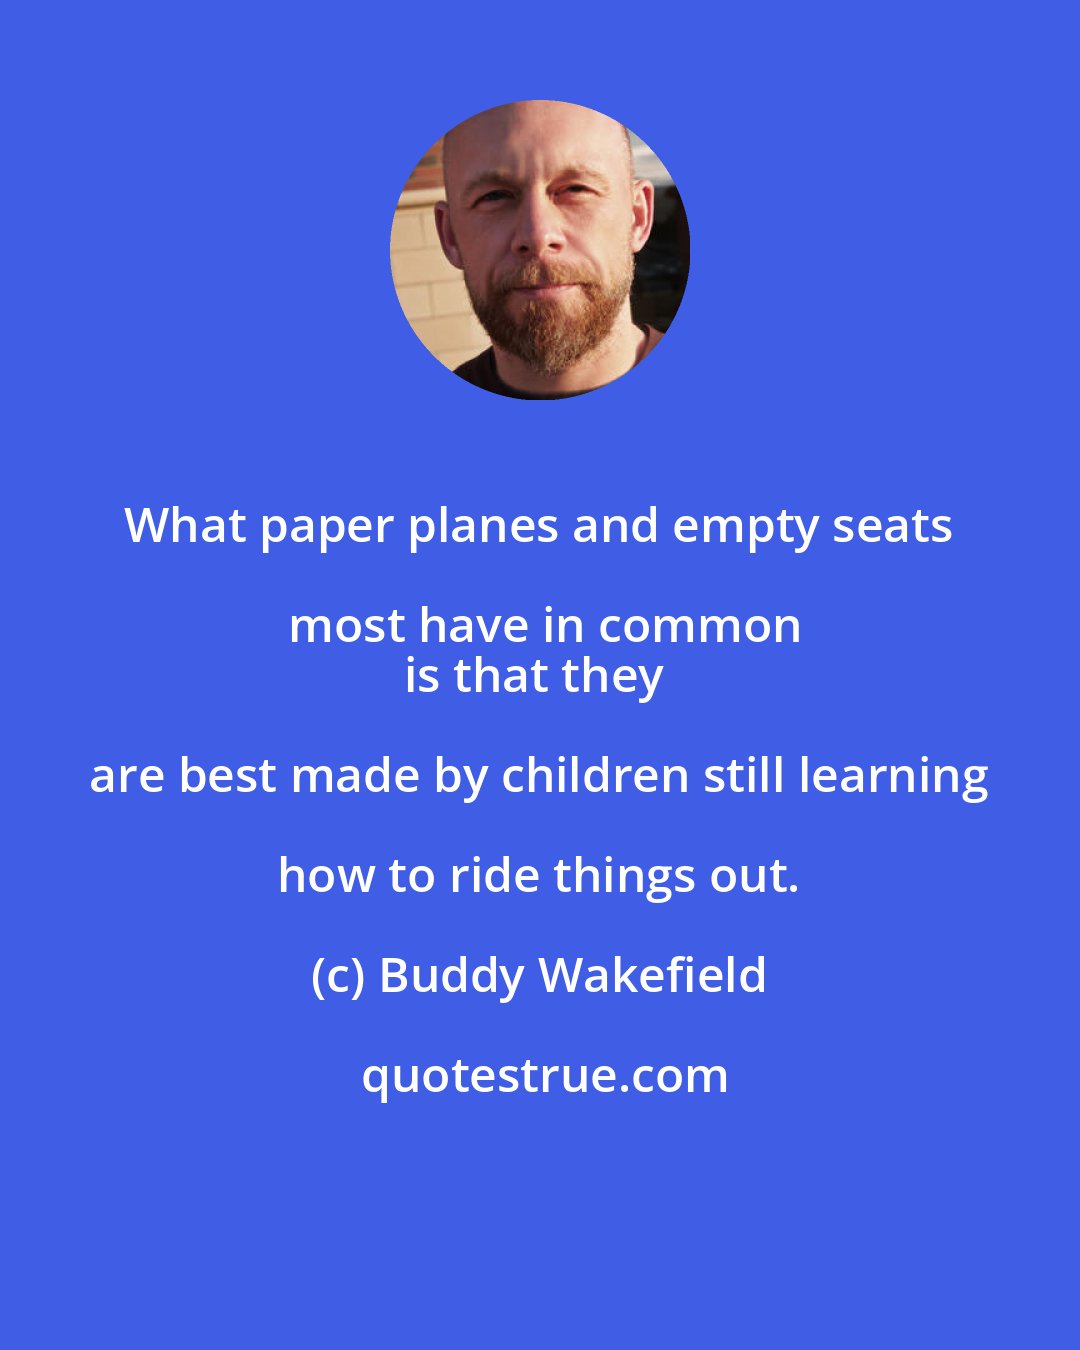 Buddy Wakefield: What paper planes and empty seats most have in common
is that they are best made by children still learning how to ride things out.